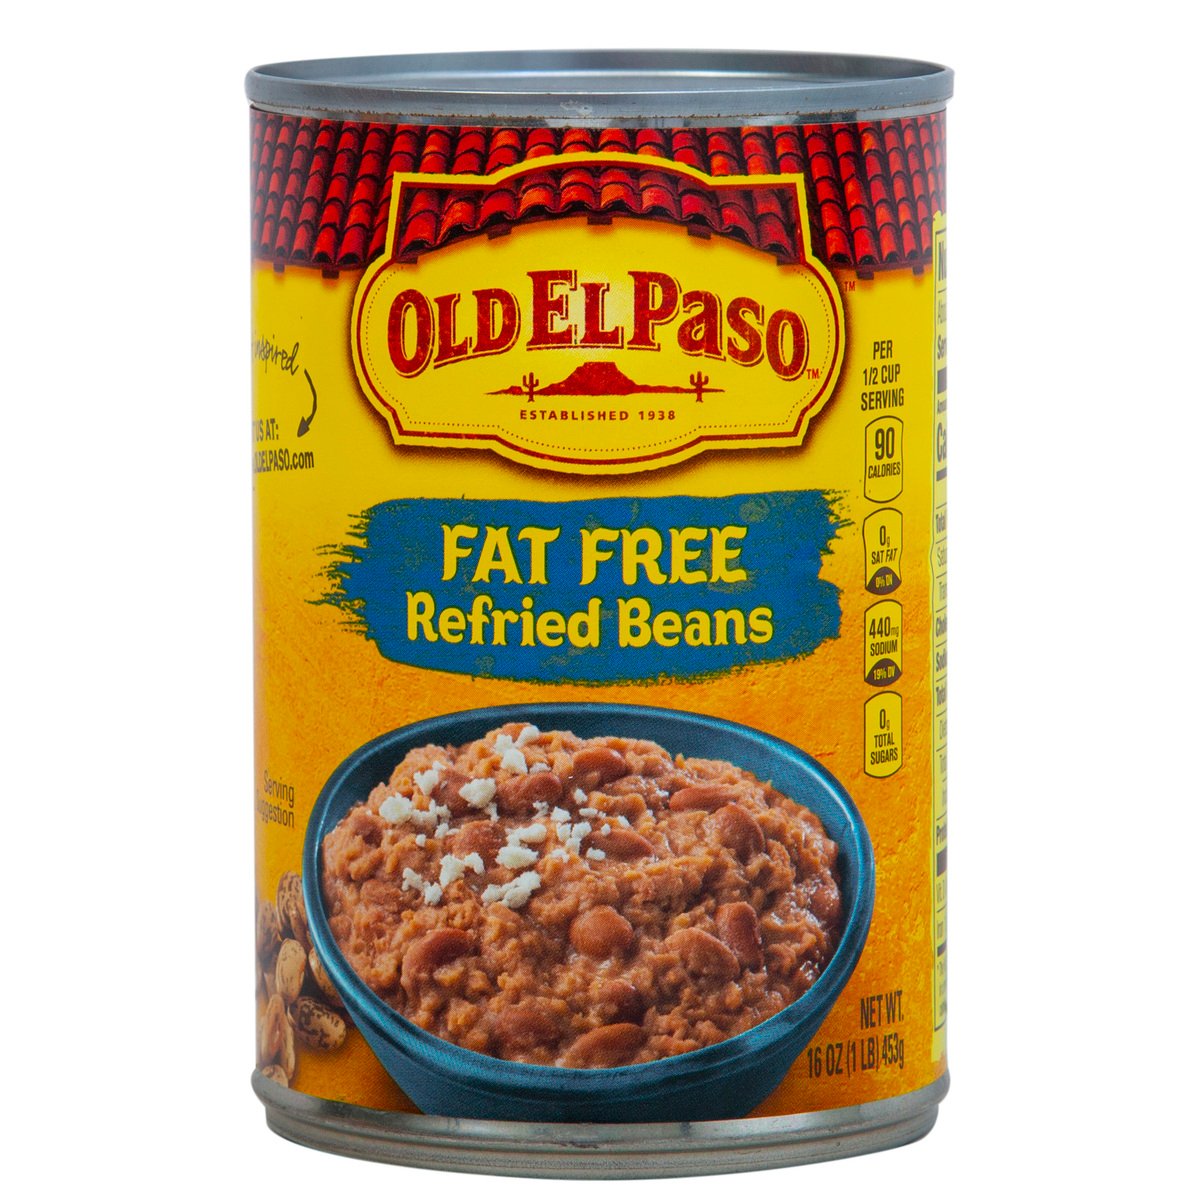 Old El Paso Refried Beans Fat Free 453g